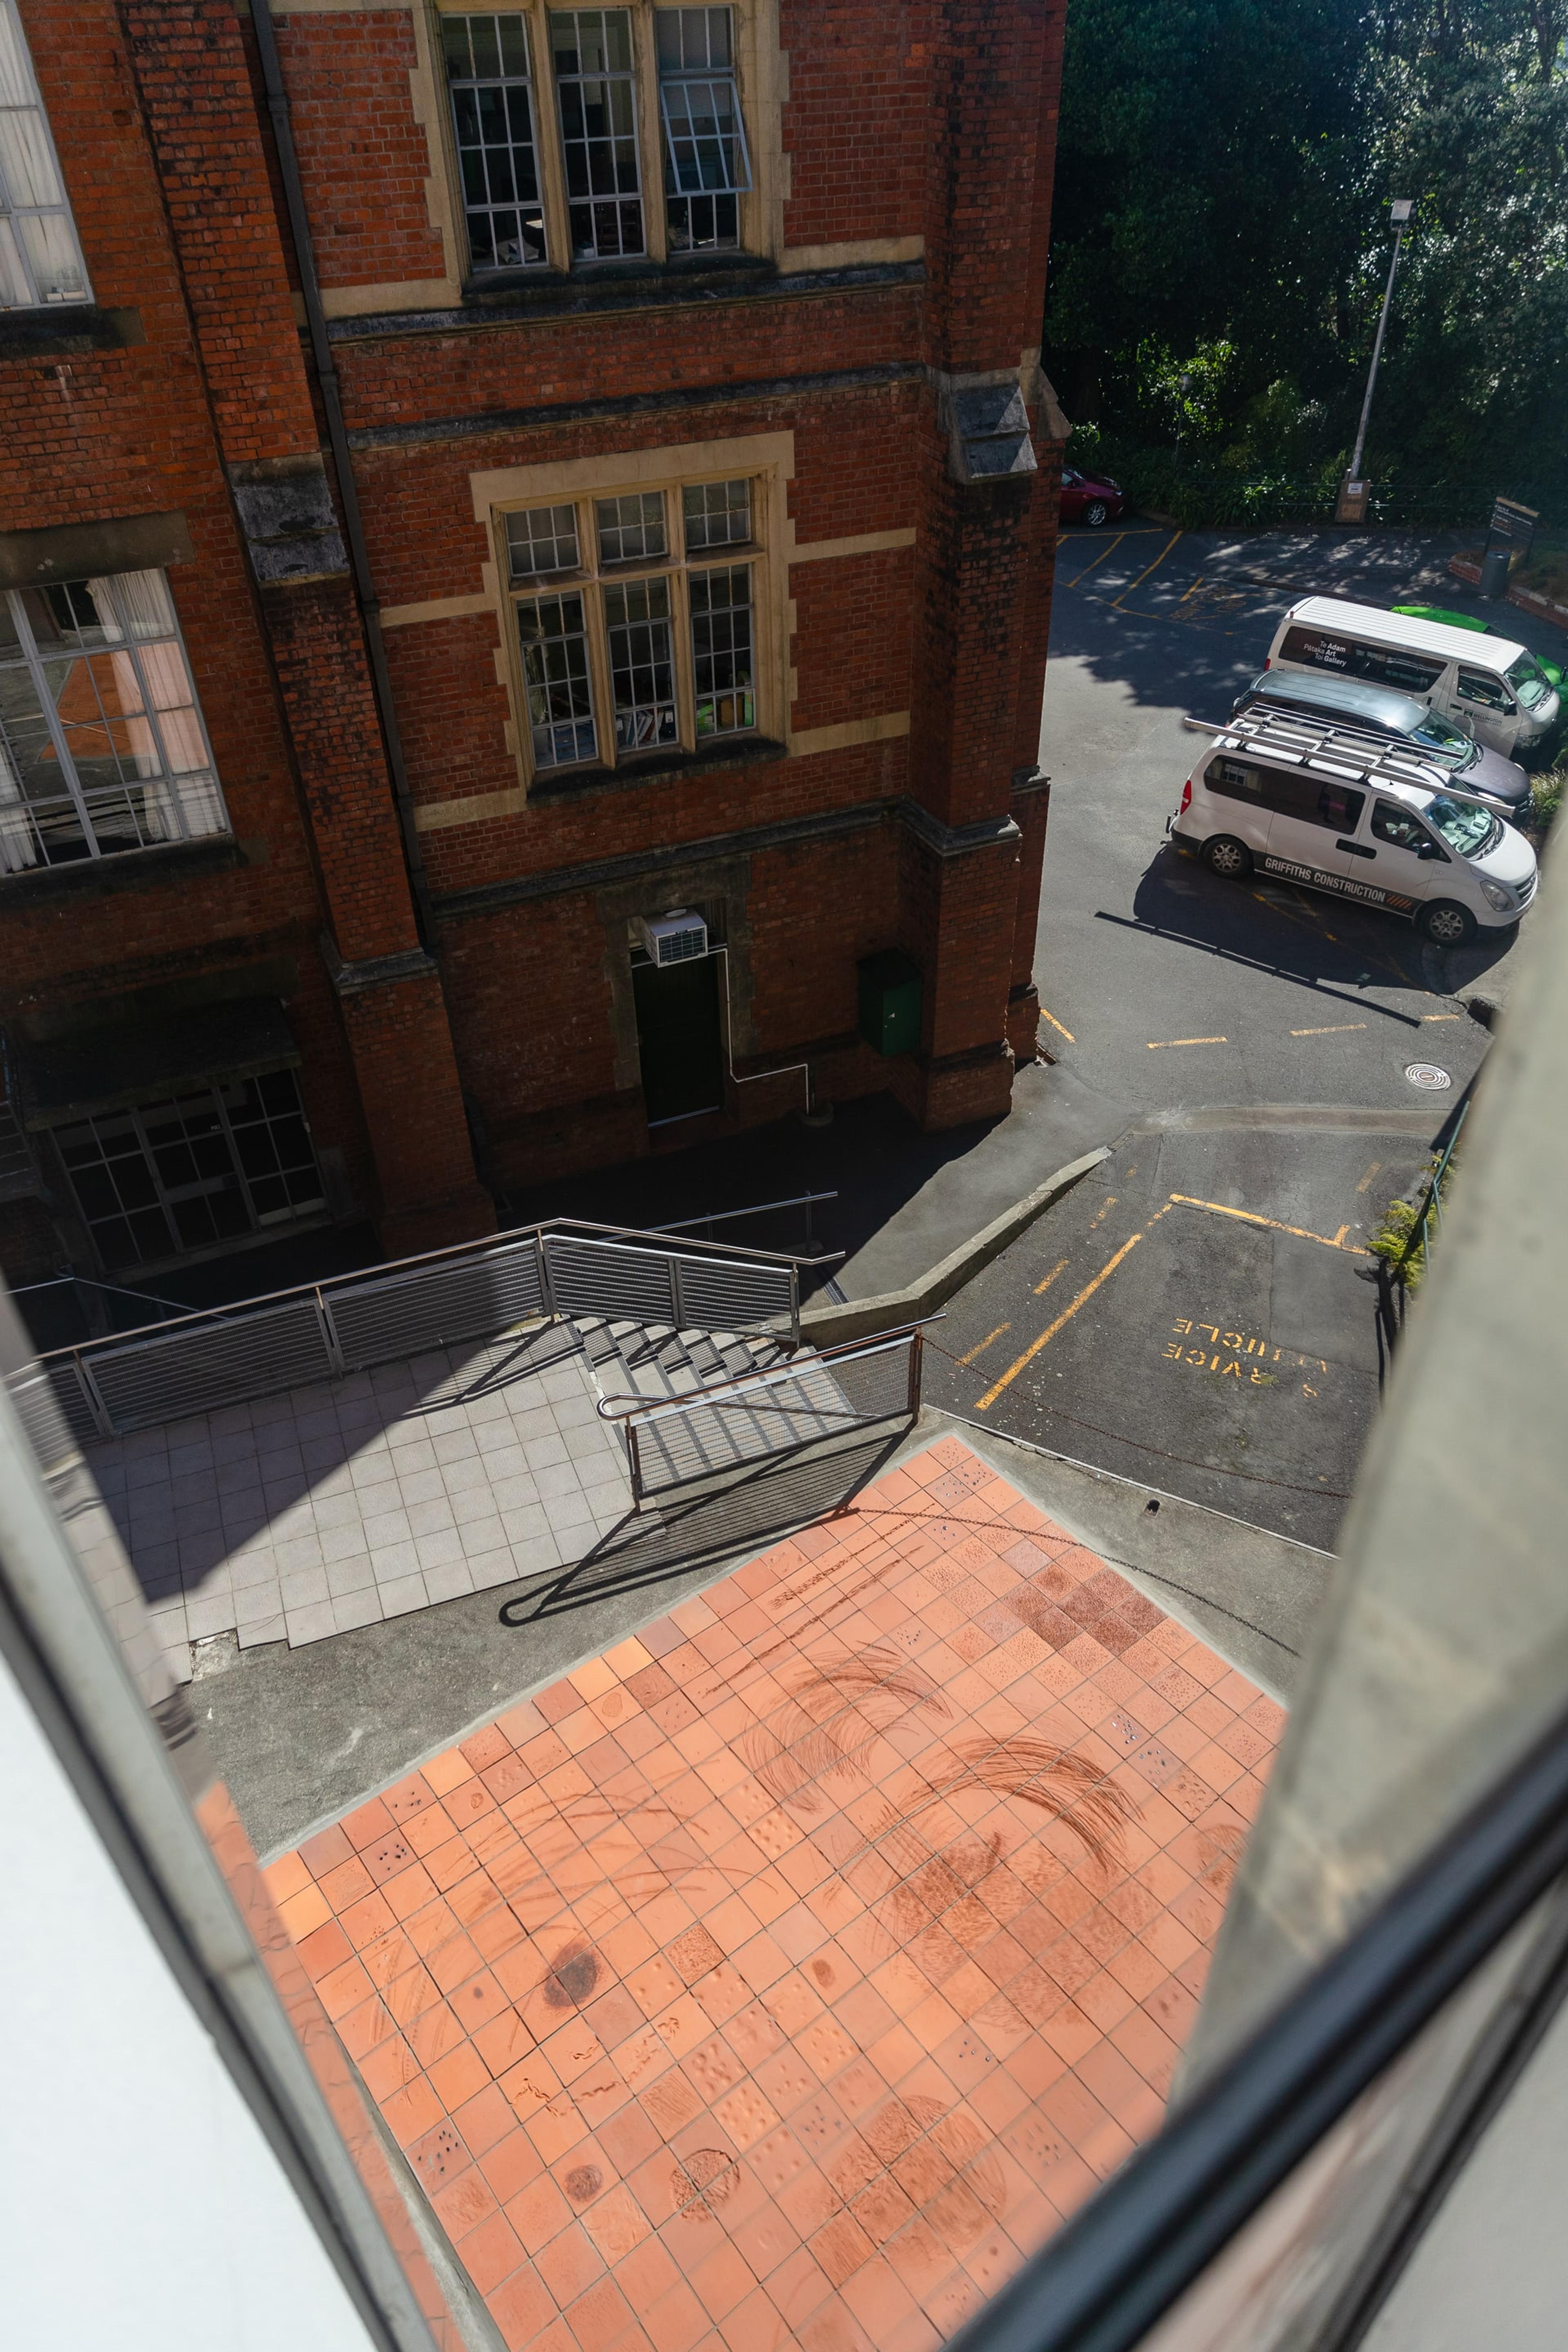 A photograph of the view looking down through a window of the gallery, at a carpark and flat tiled area covered in terracotta tiles with large scratches and marks.